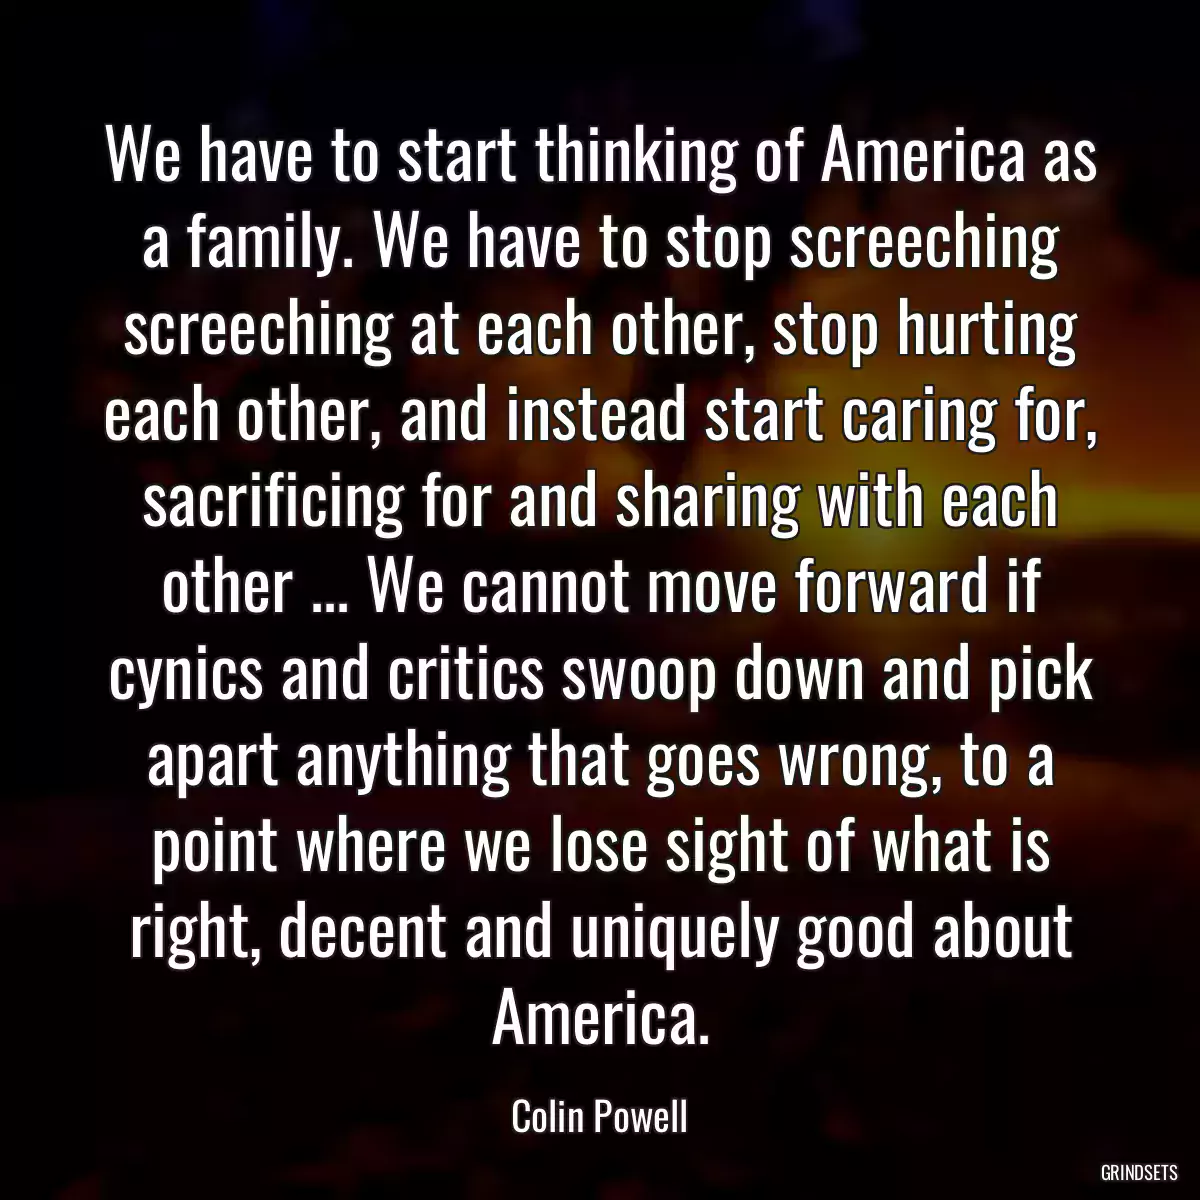 We have to start thinking of America as a family. We have to stop screeching screeching at each other, stop hurting each other, and instead start caring for, sacrificing for and sharing with each other ... We cannot move forward if cynics and critics swoop down and pick apart anything that goes wrong, to a point where we lose sight of what is right, decent and uniquely good about America.